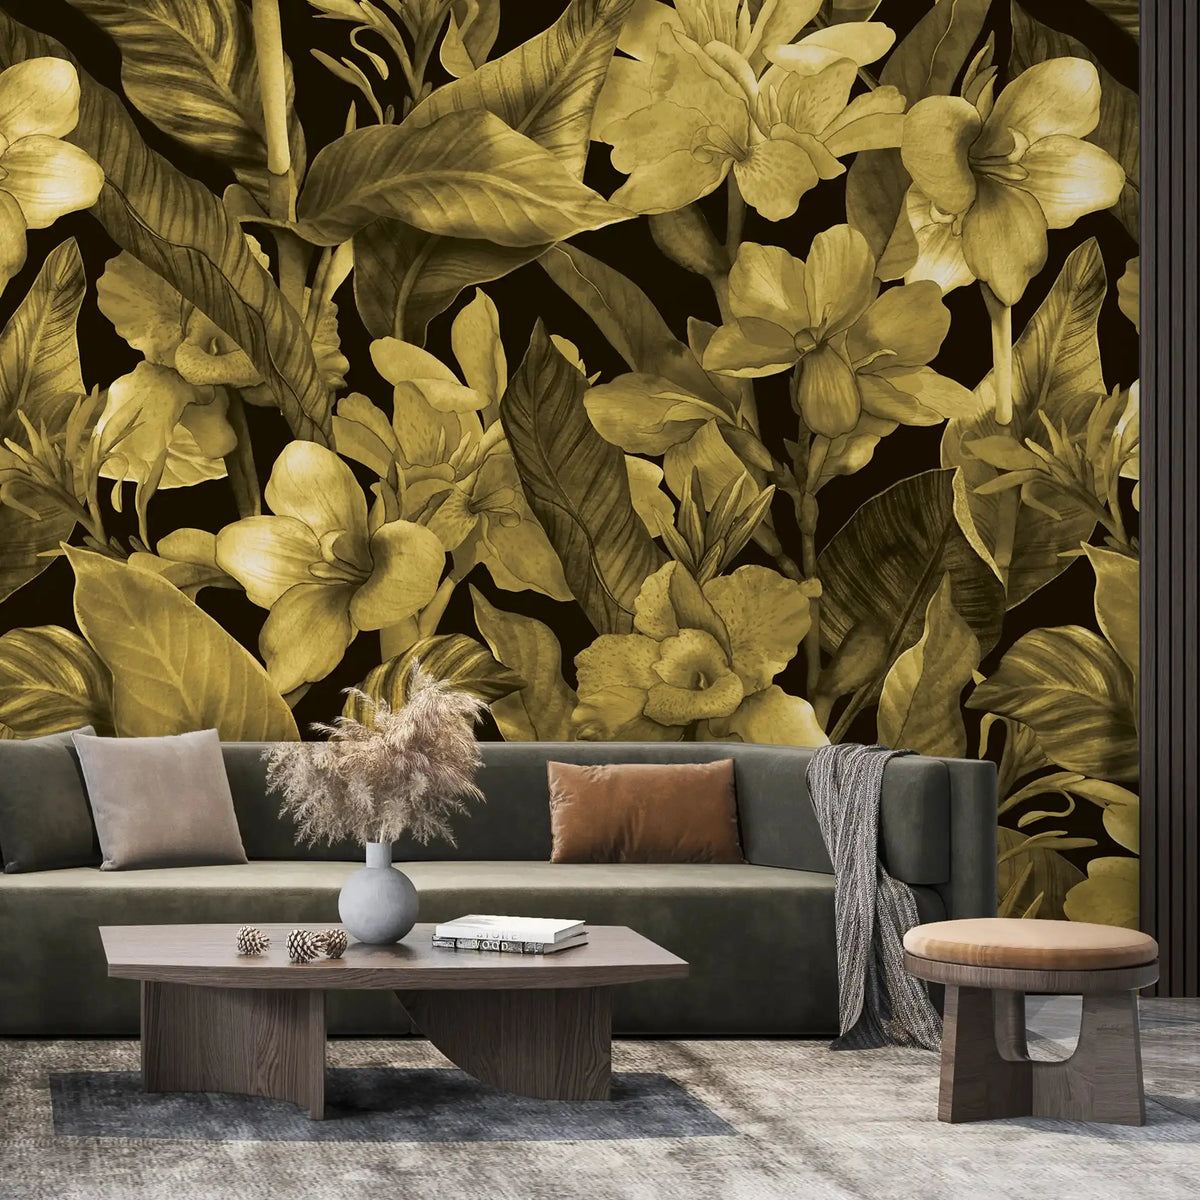 3074-A / Botanical Peel and Stick Wallpaper: Gold Floral & Black Leaf Pattern, Perfect for Accent Wall Decor - Artevella